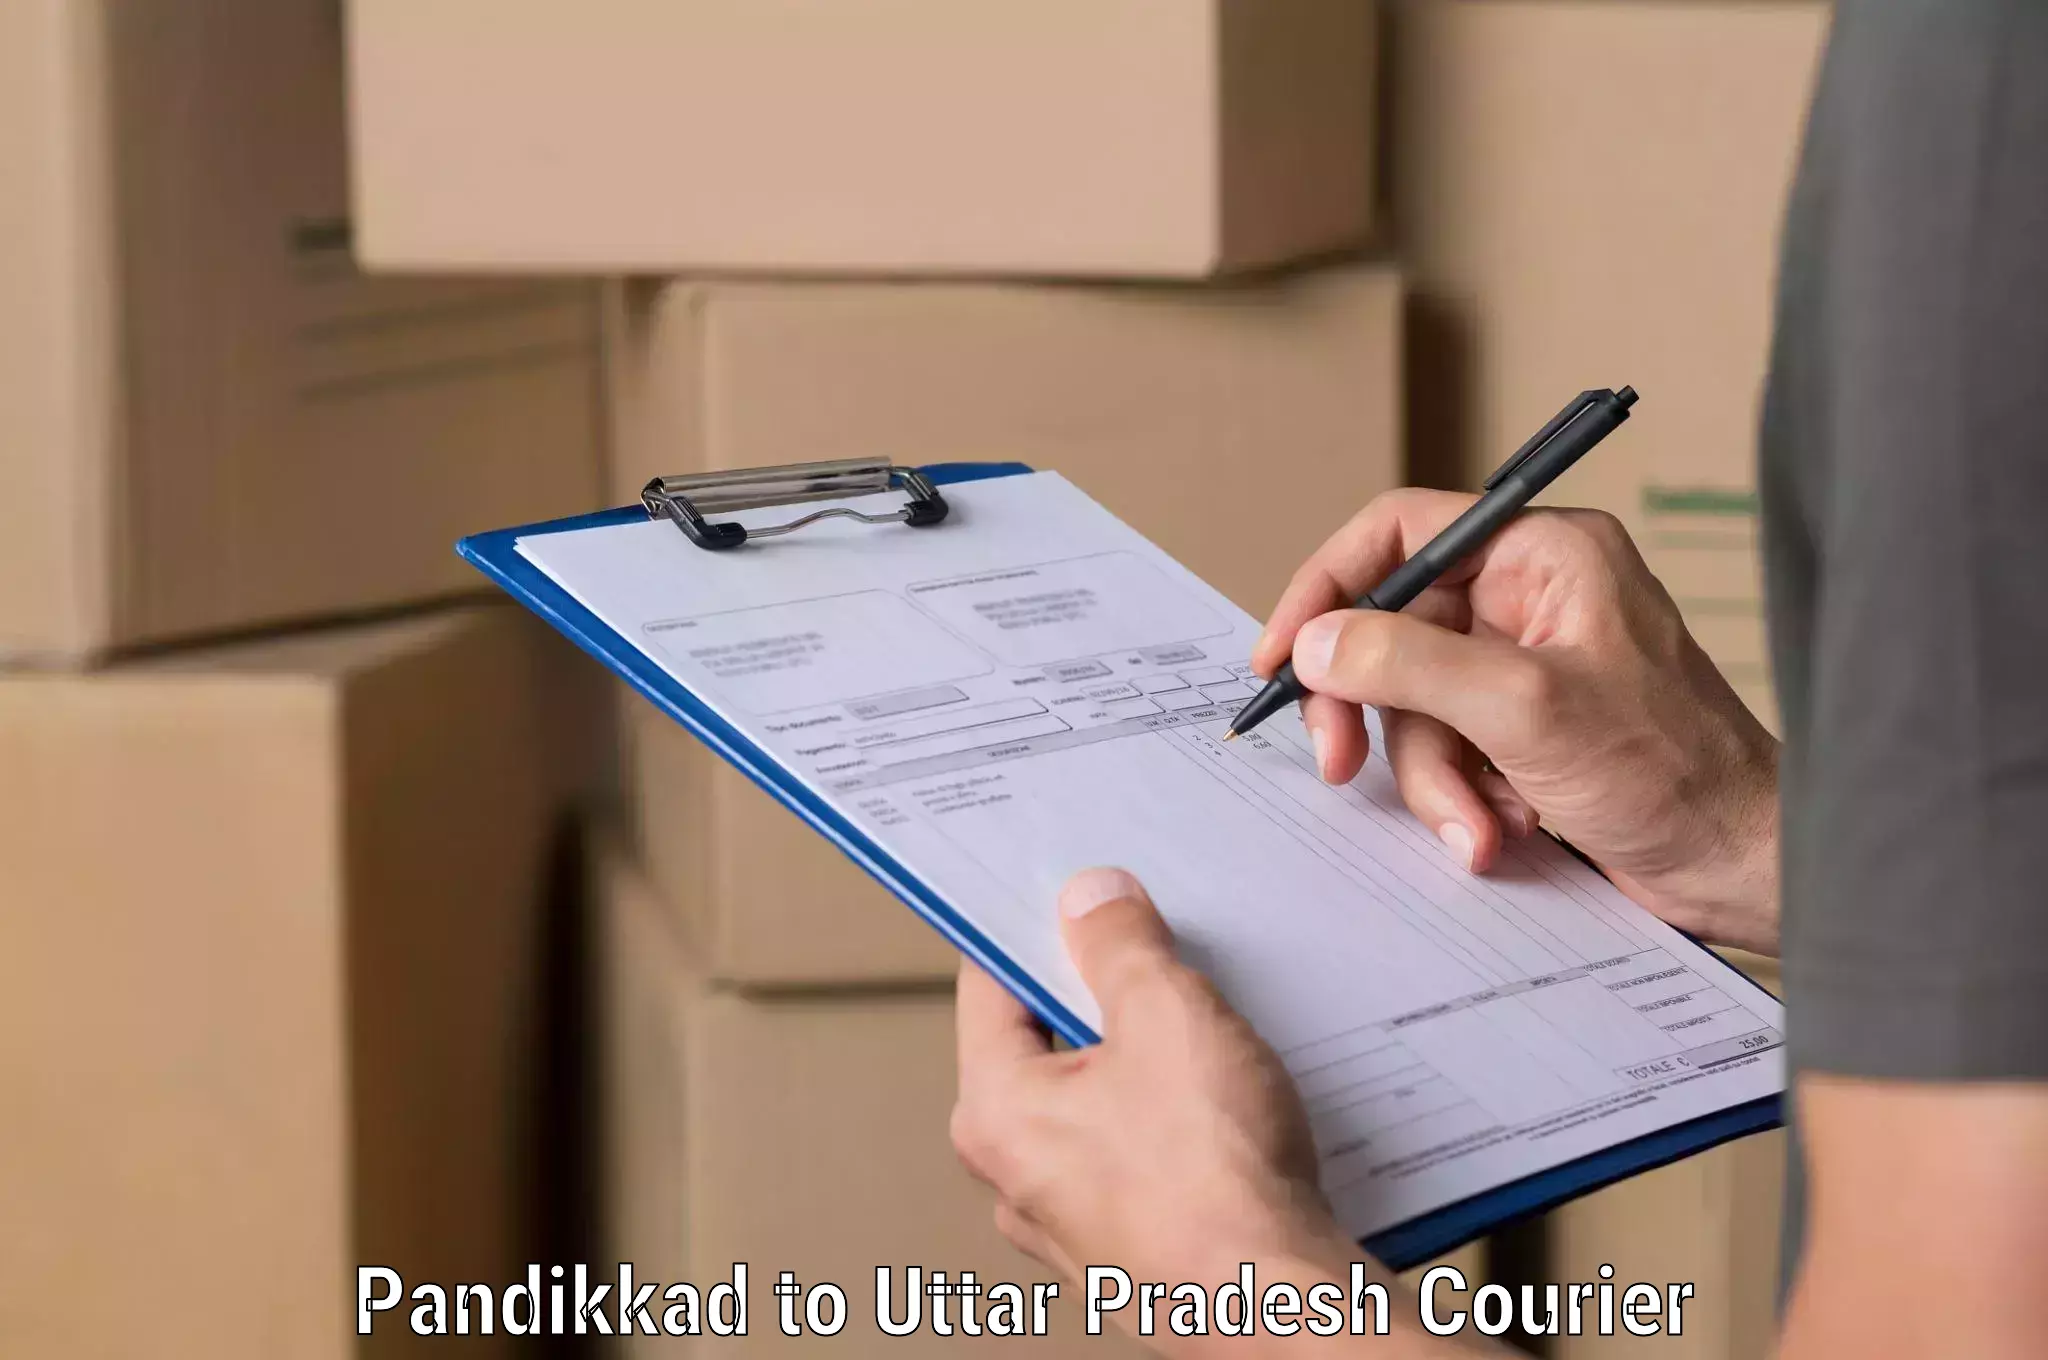 Expedited shipping solutions Pandikkad to Bareilly